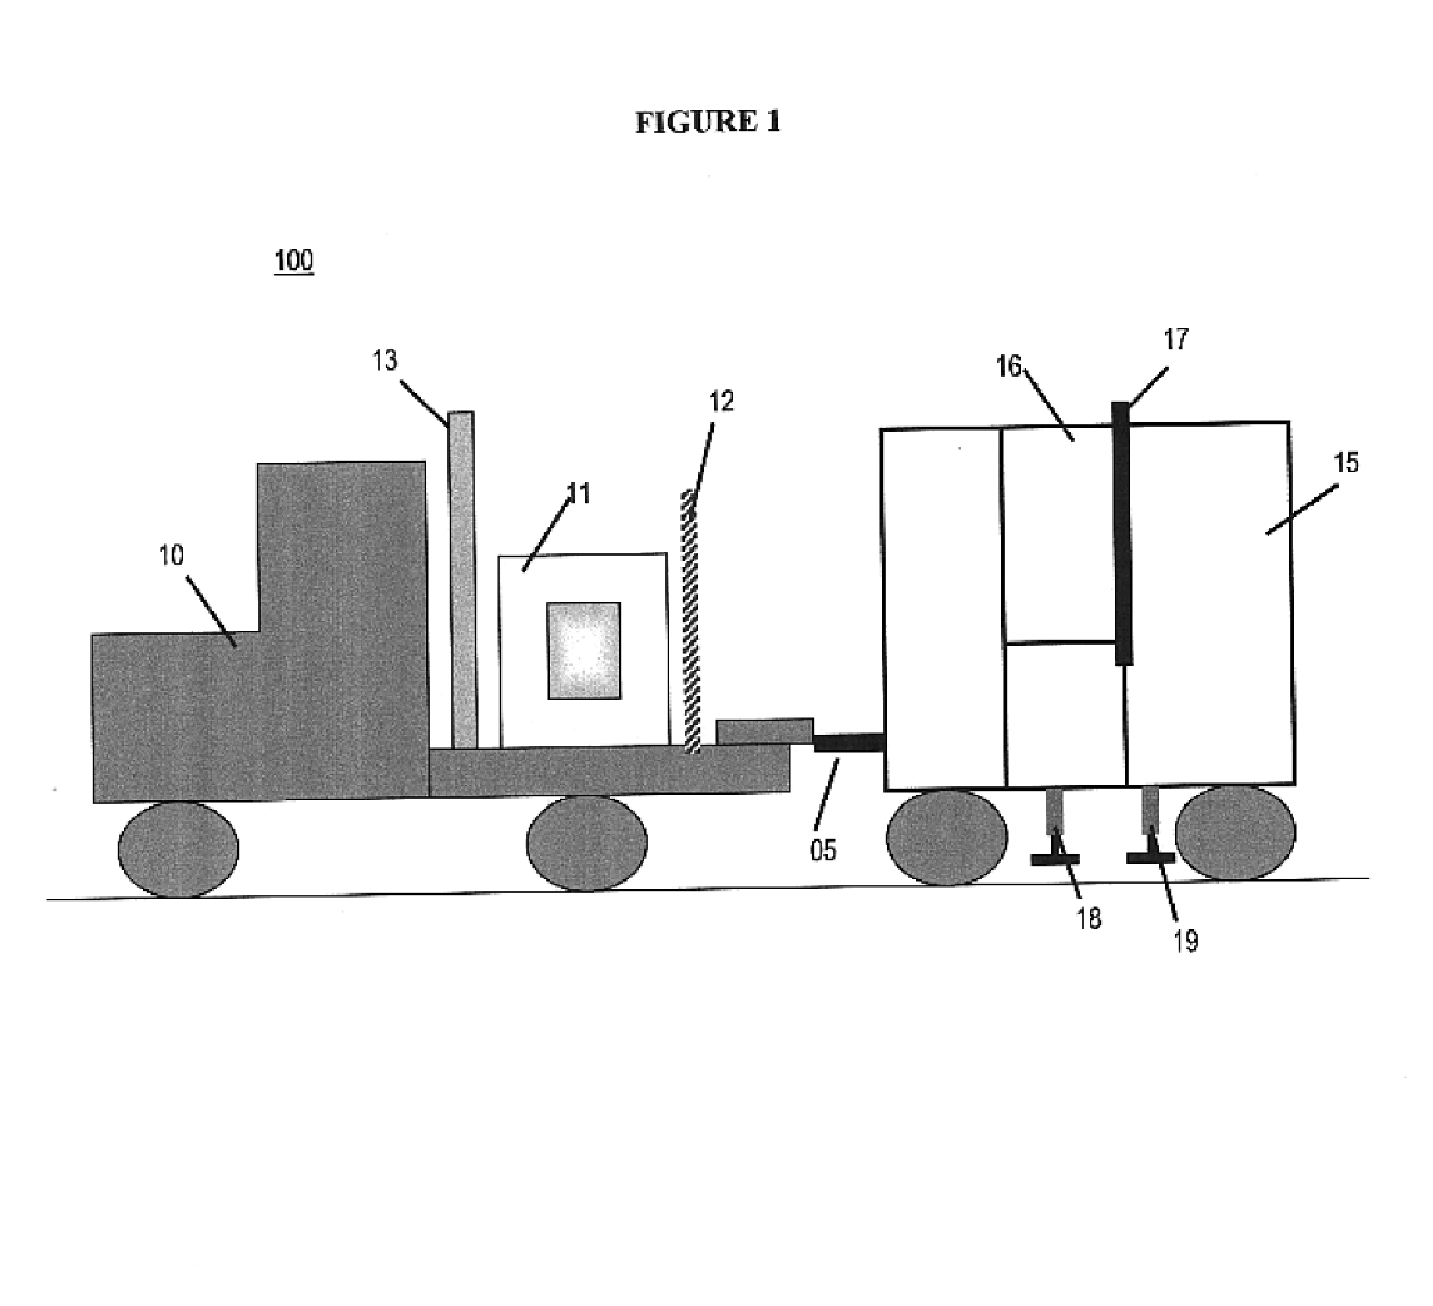 Self-contained, portable inspection system and method